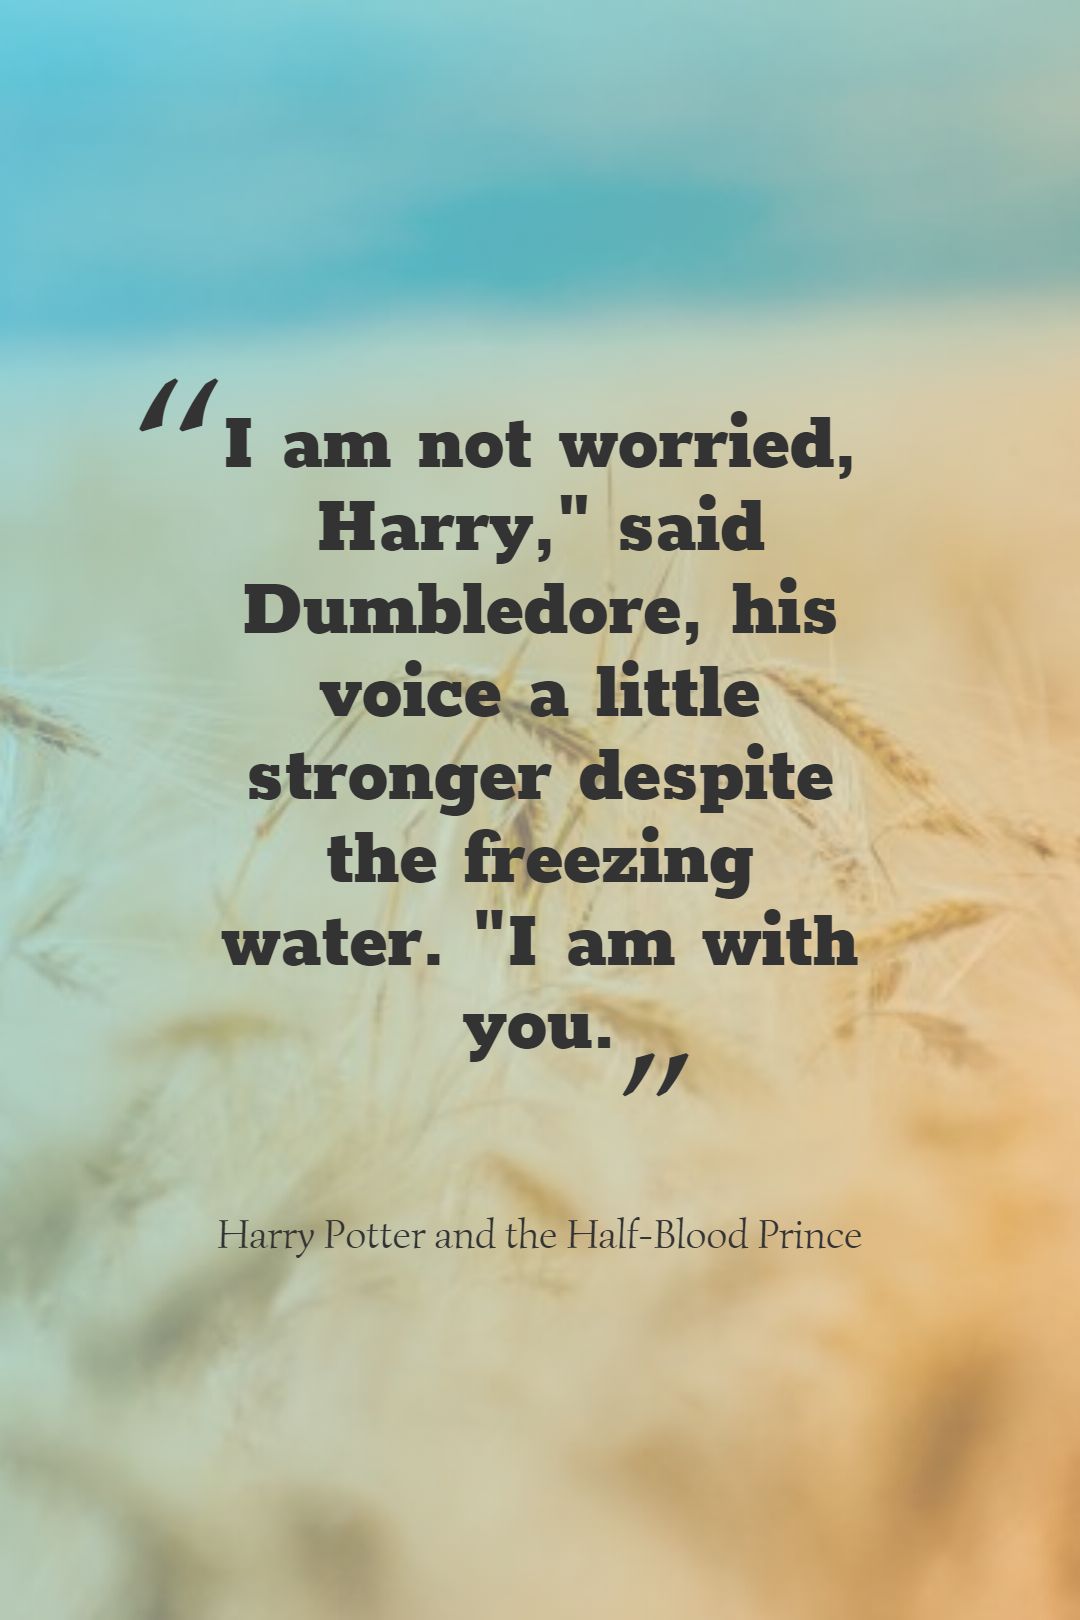 I am not worried Harry said Dumbledore his voice a little stronger despite the freezing water. I am with you.